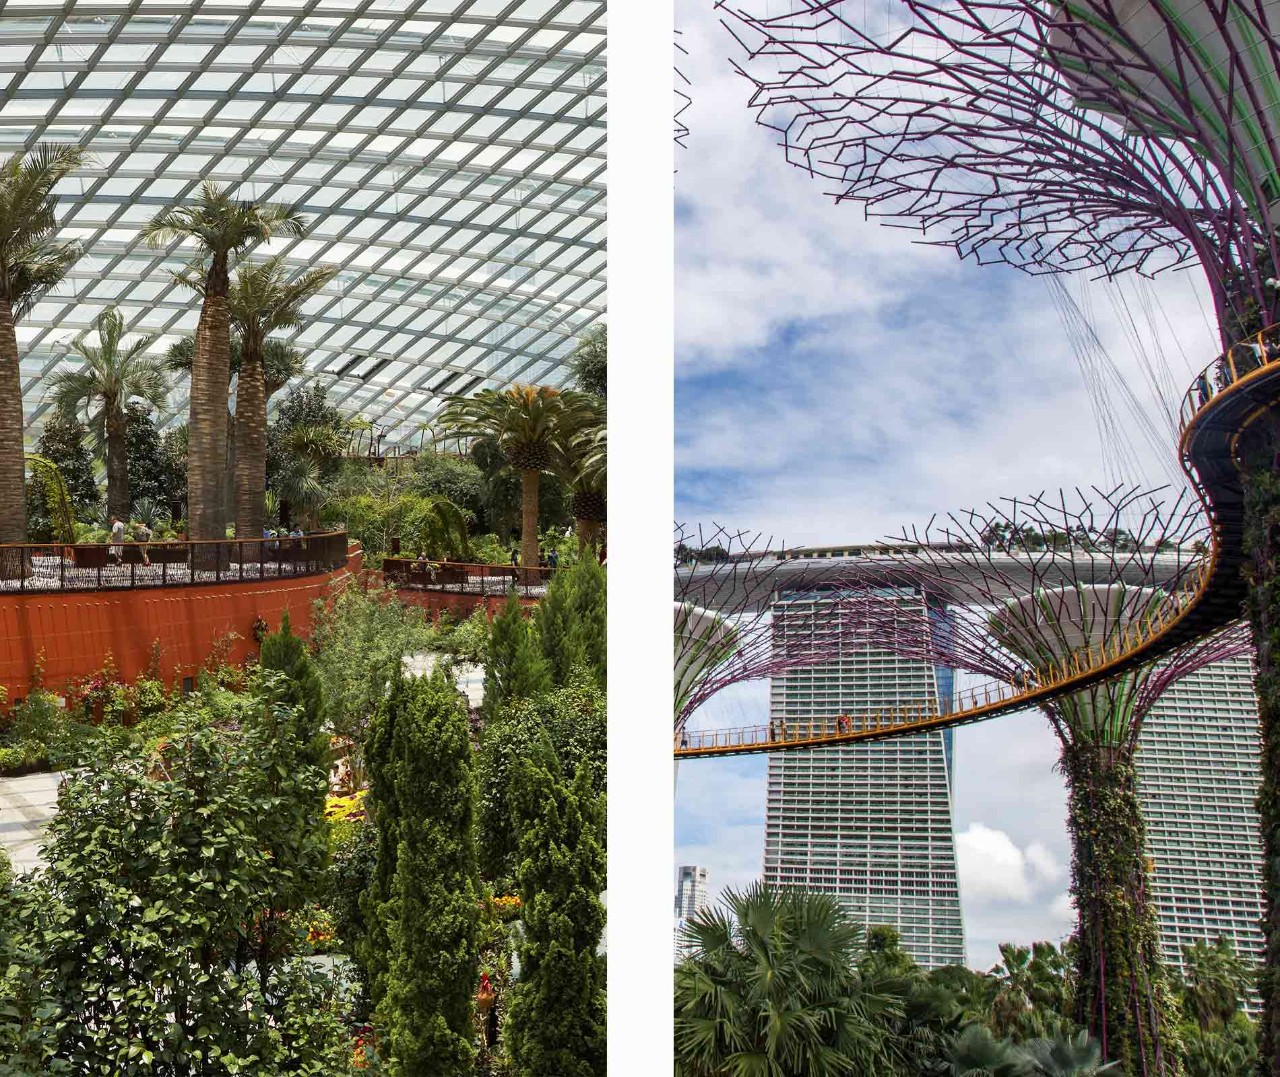 Supertrees and Flower Dome at Gardens by the Bay, a top instagrammable place in Singapore